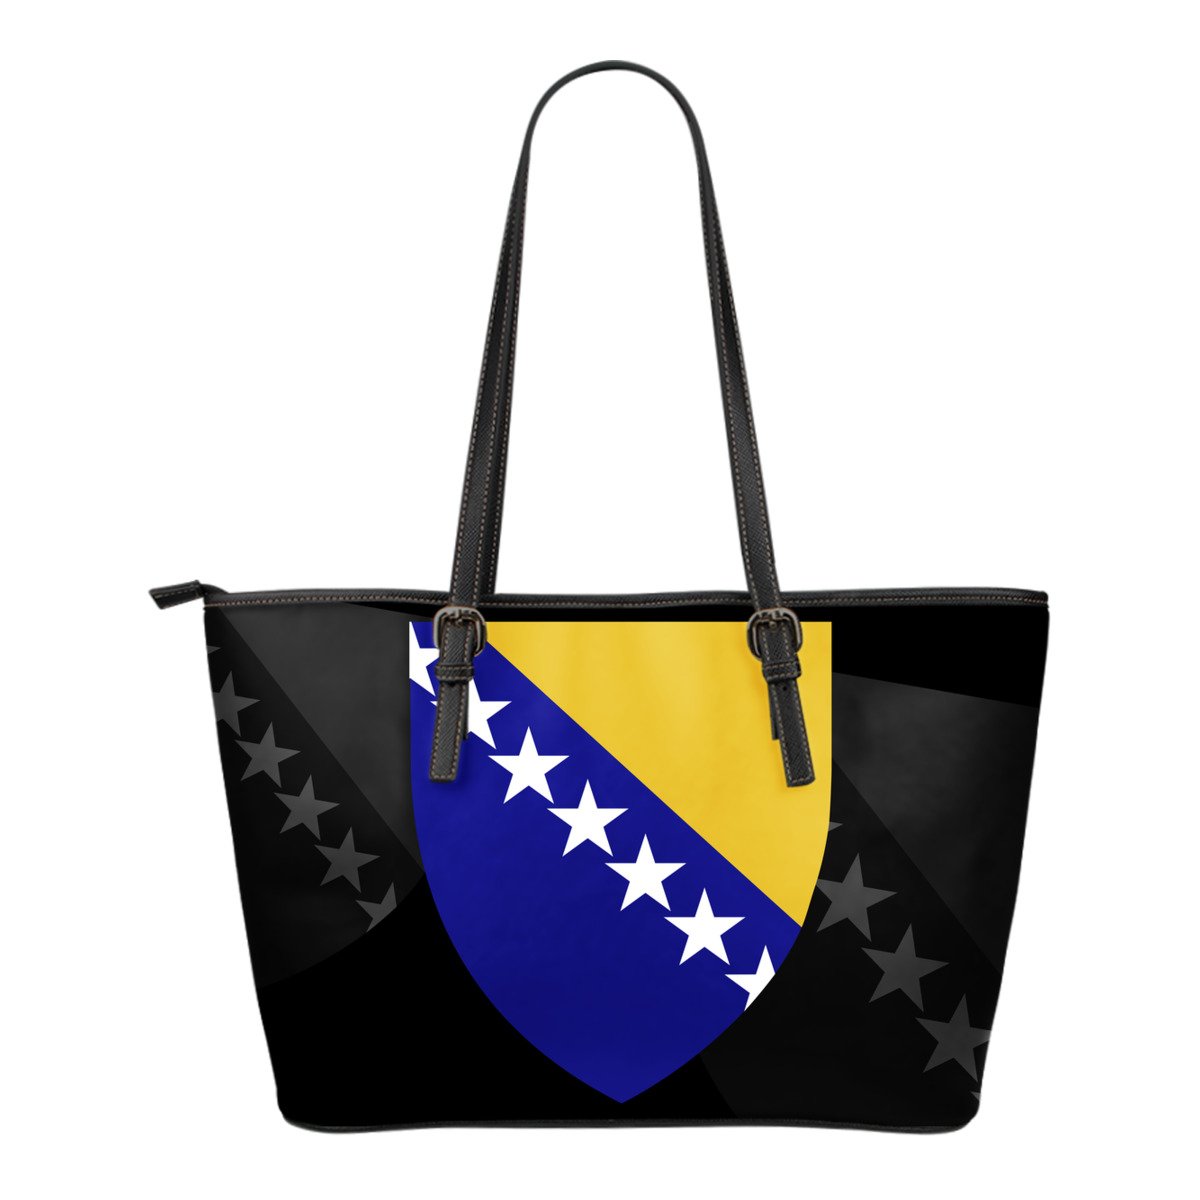 bosnia-and-herzegovina-leather-tote-bag-small-size